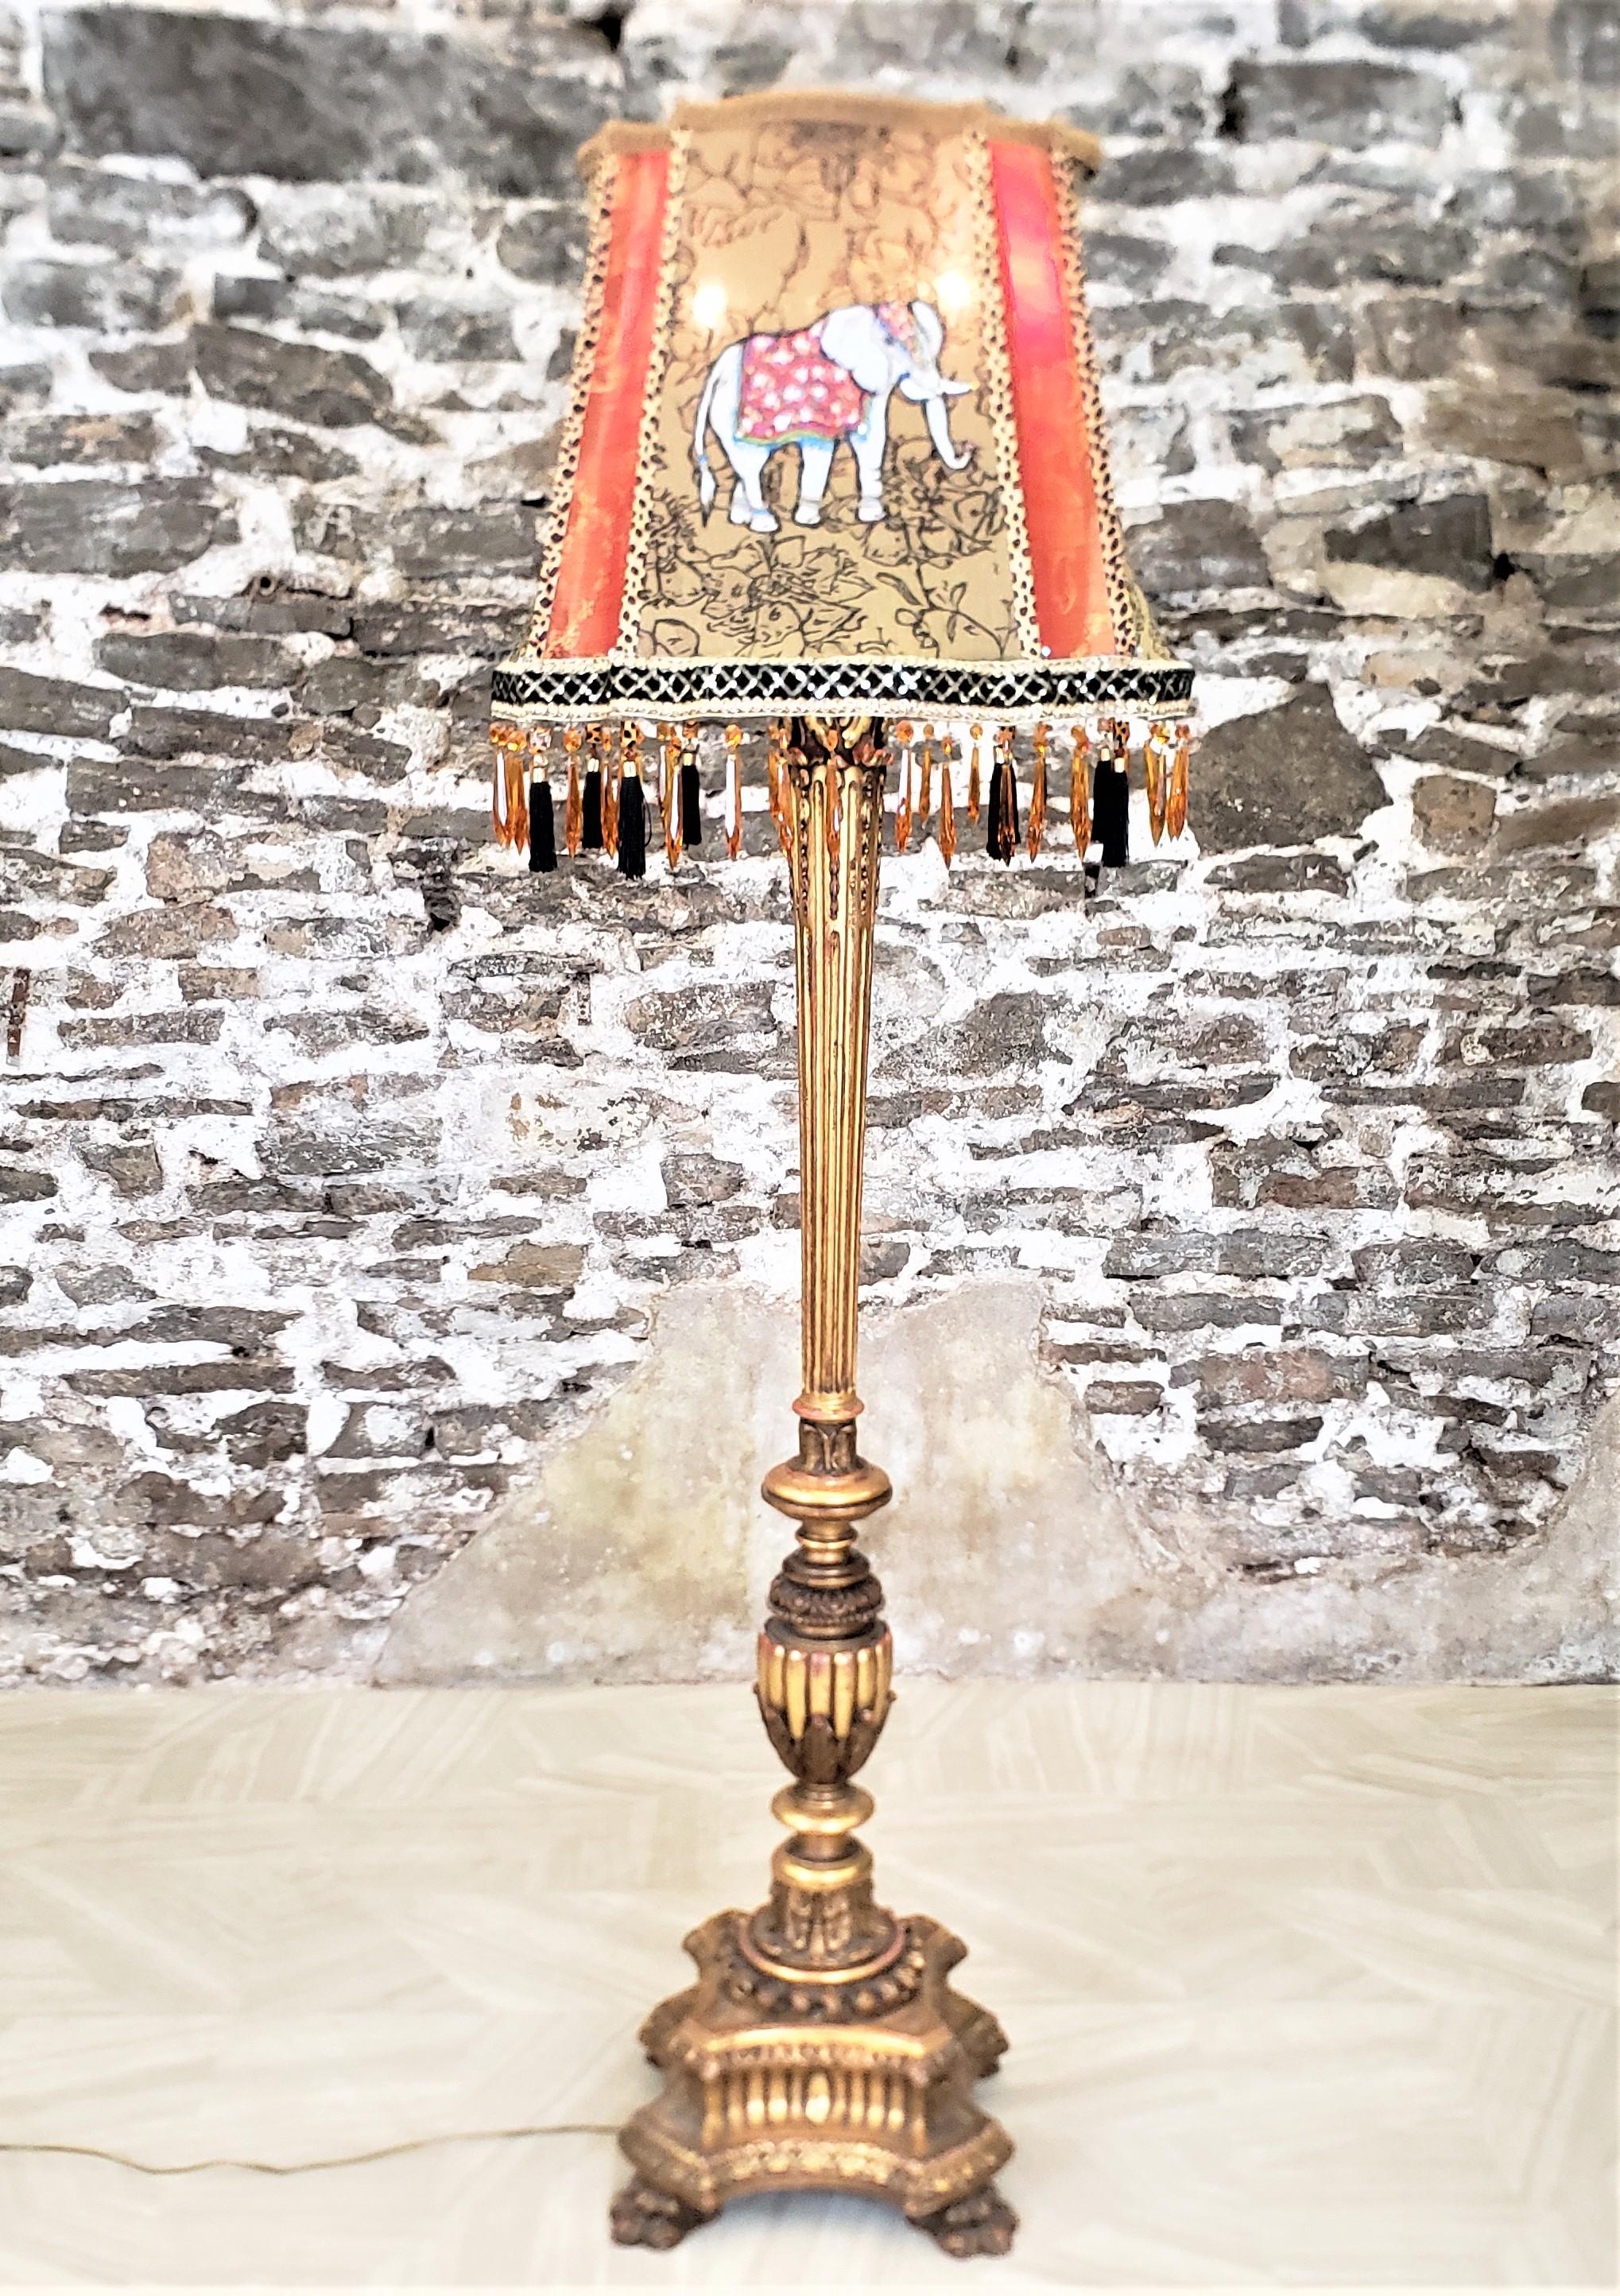 Gesso Antique Italian Florentine Hand-Carved & Gilt Finished Floor Lamp & Shade For Sale